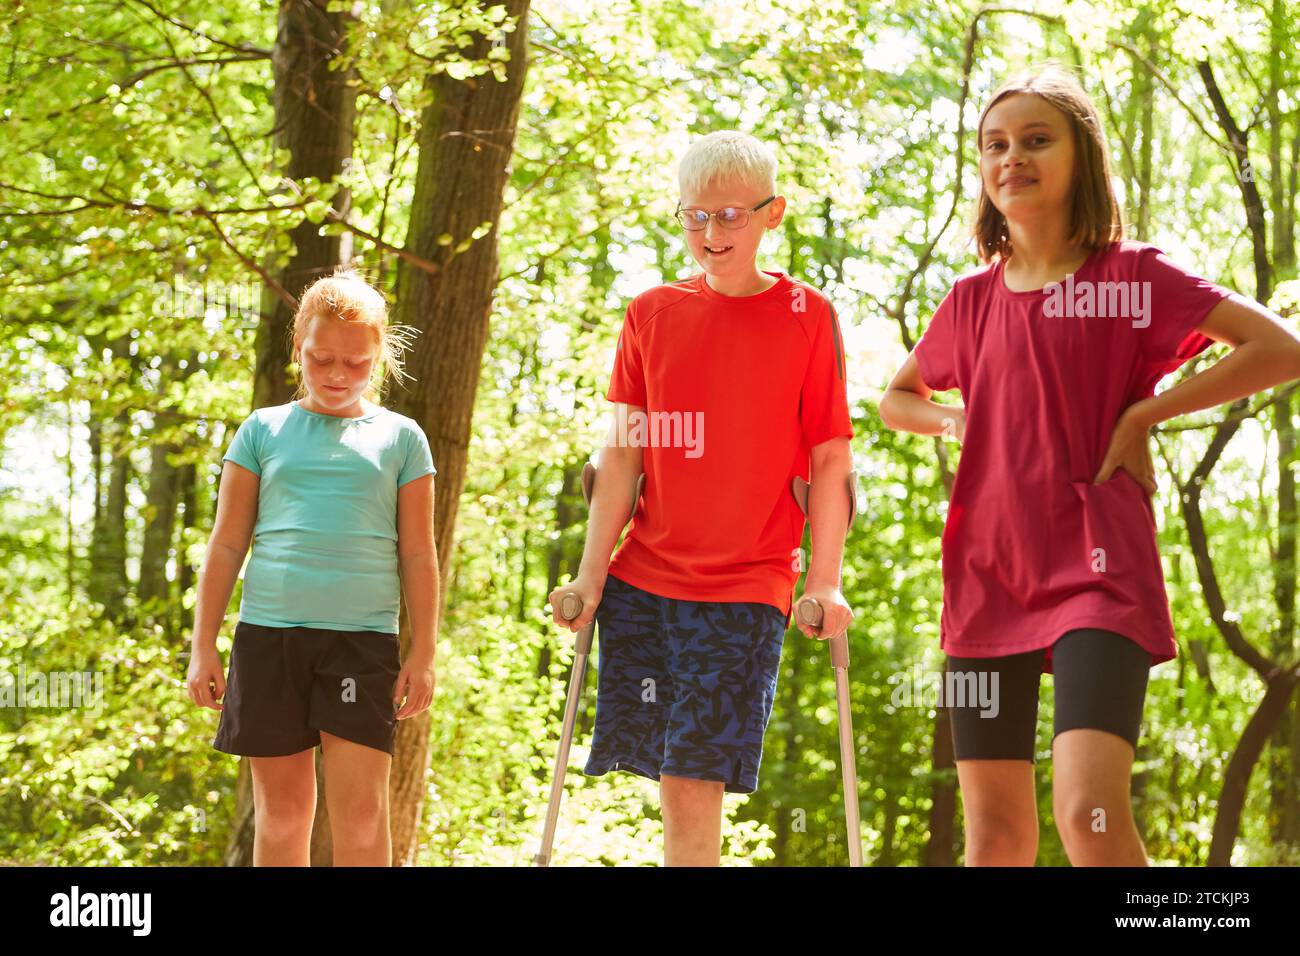 Female friends standing with boy walking with crutches in forest Stock Photo